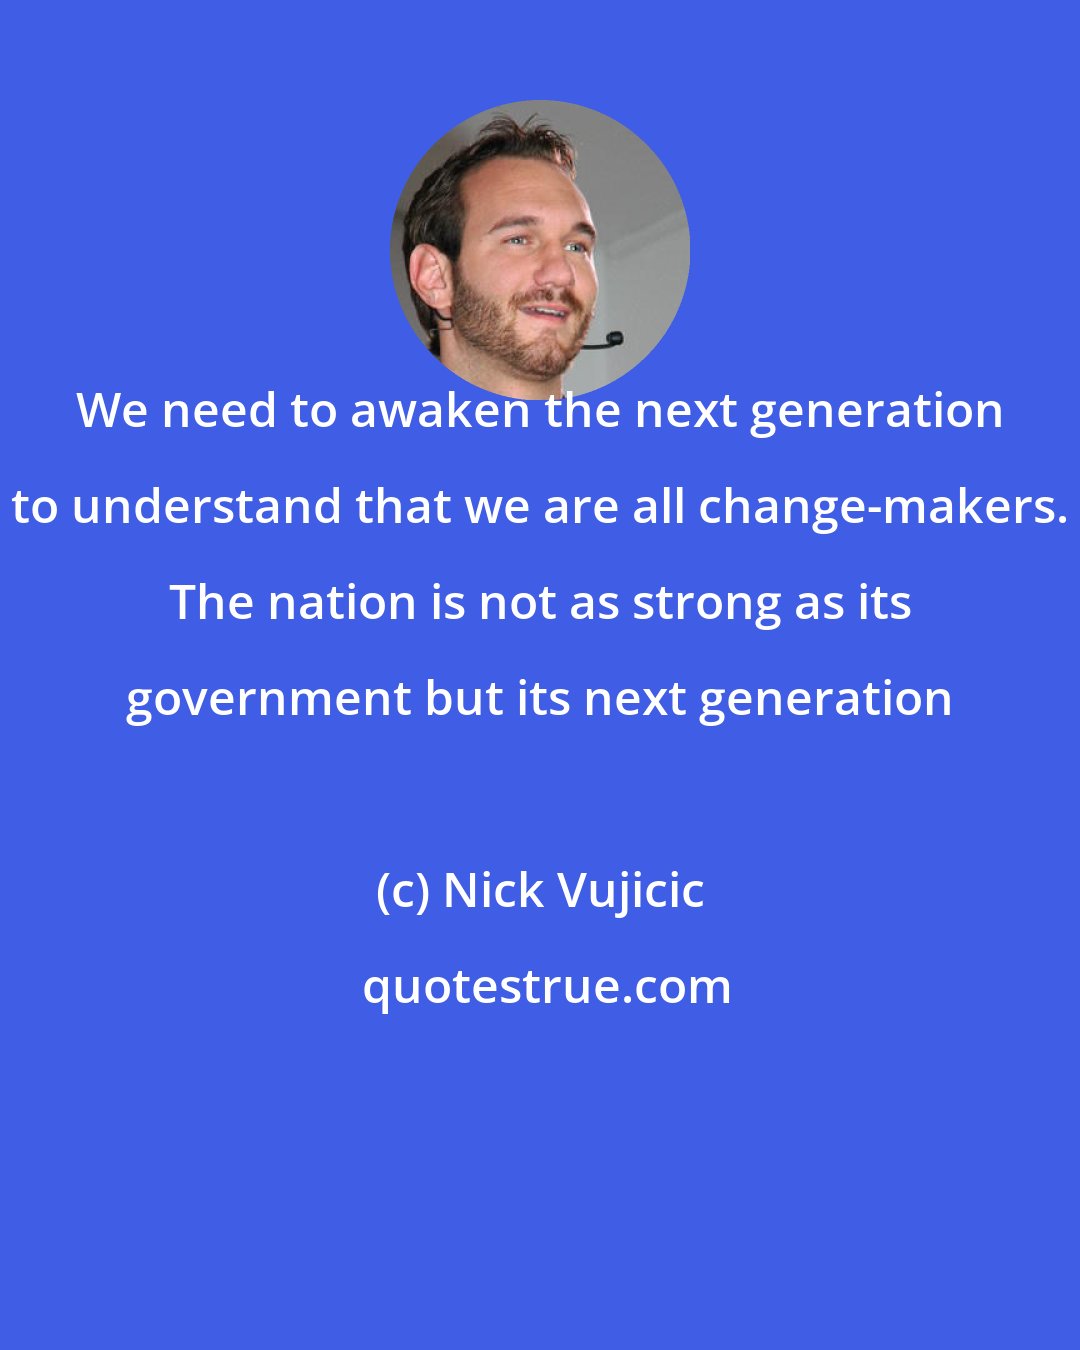 Nick Vujicic: We need to awaken the next generation to understand that we are all change-makers. The nation is not as strong as its government but its next generation